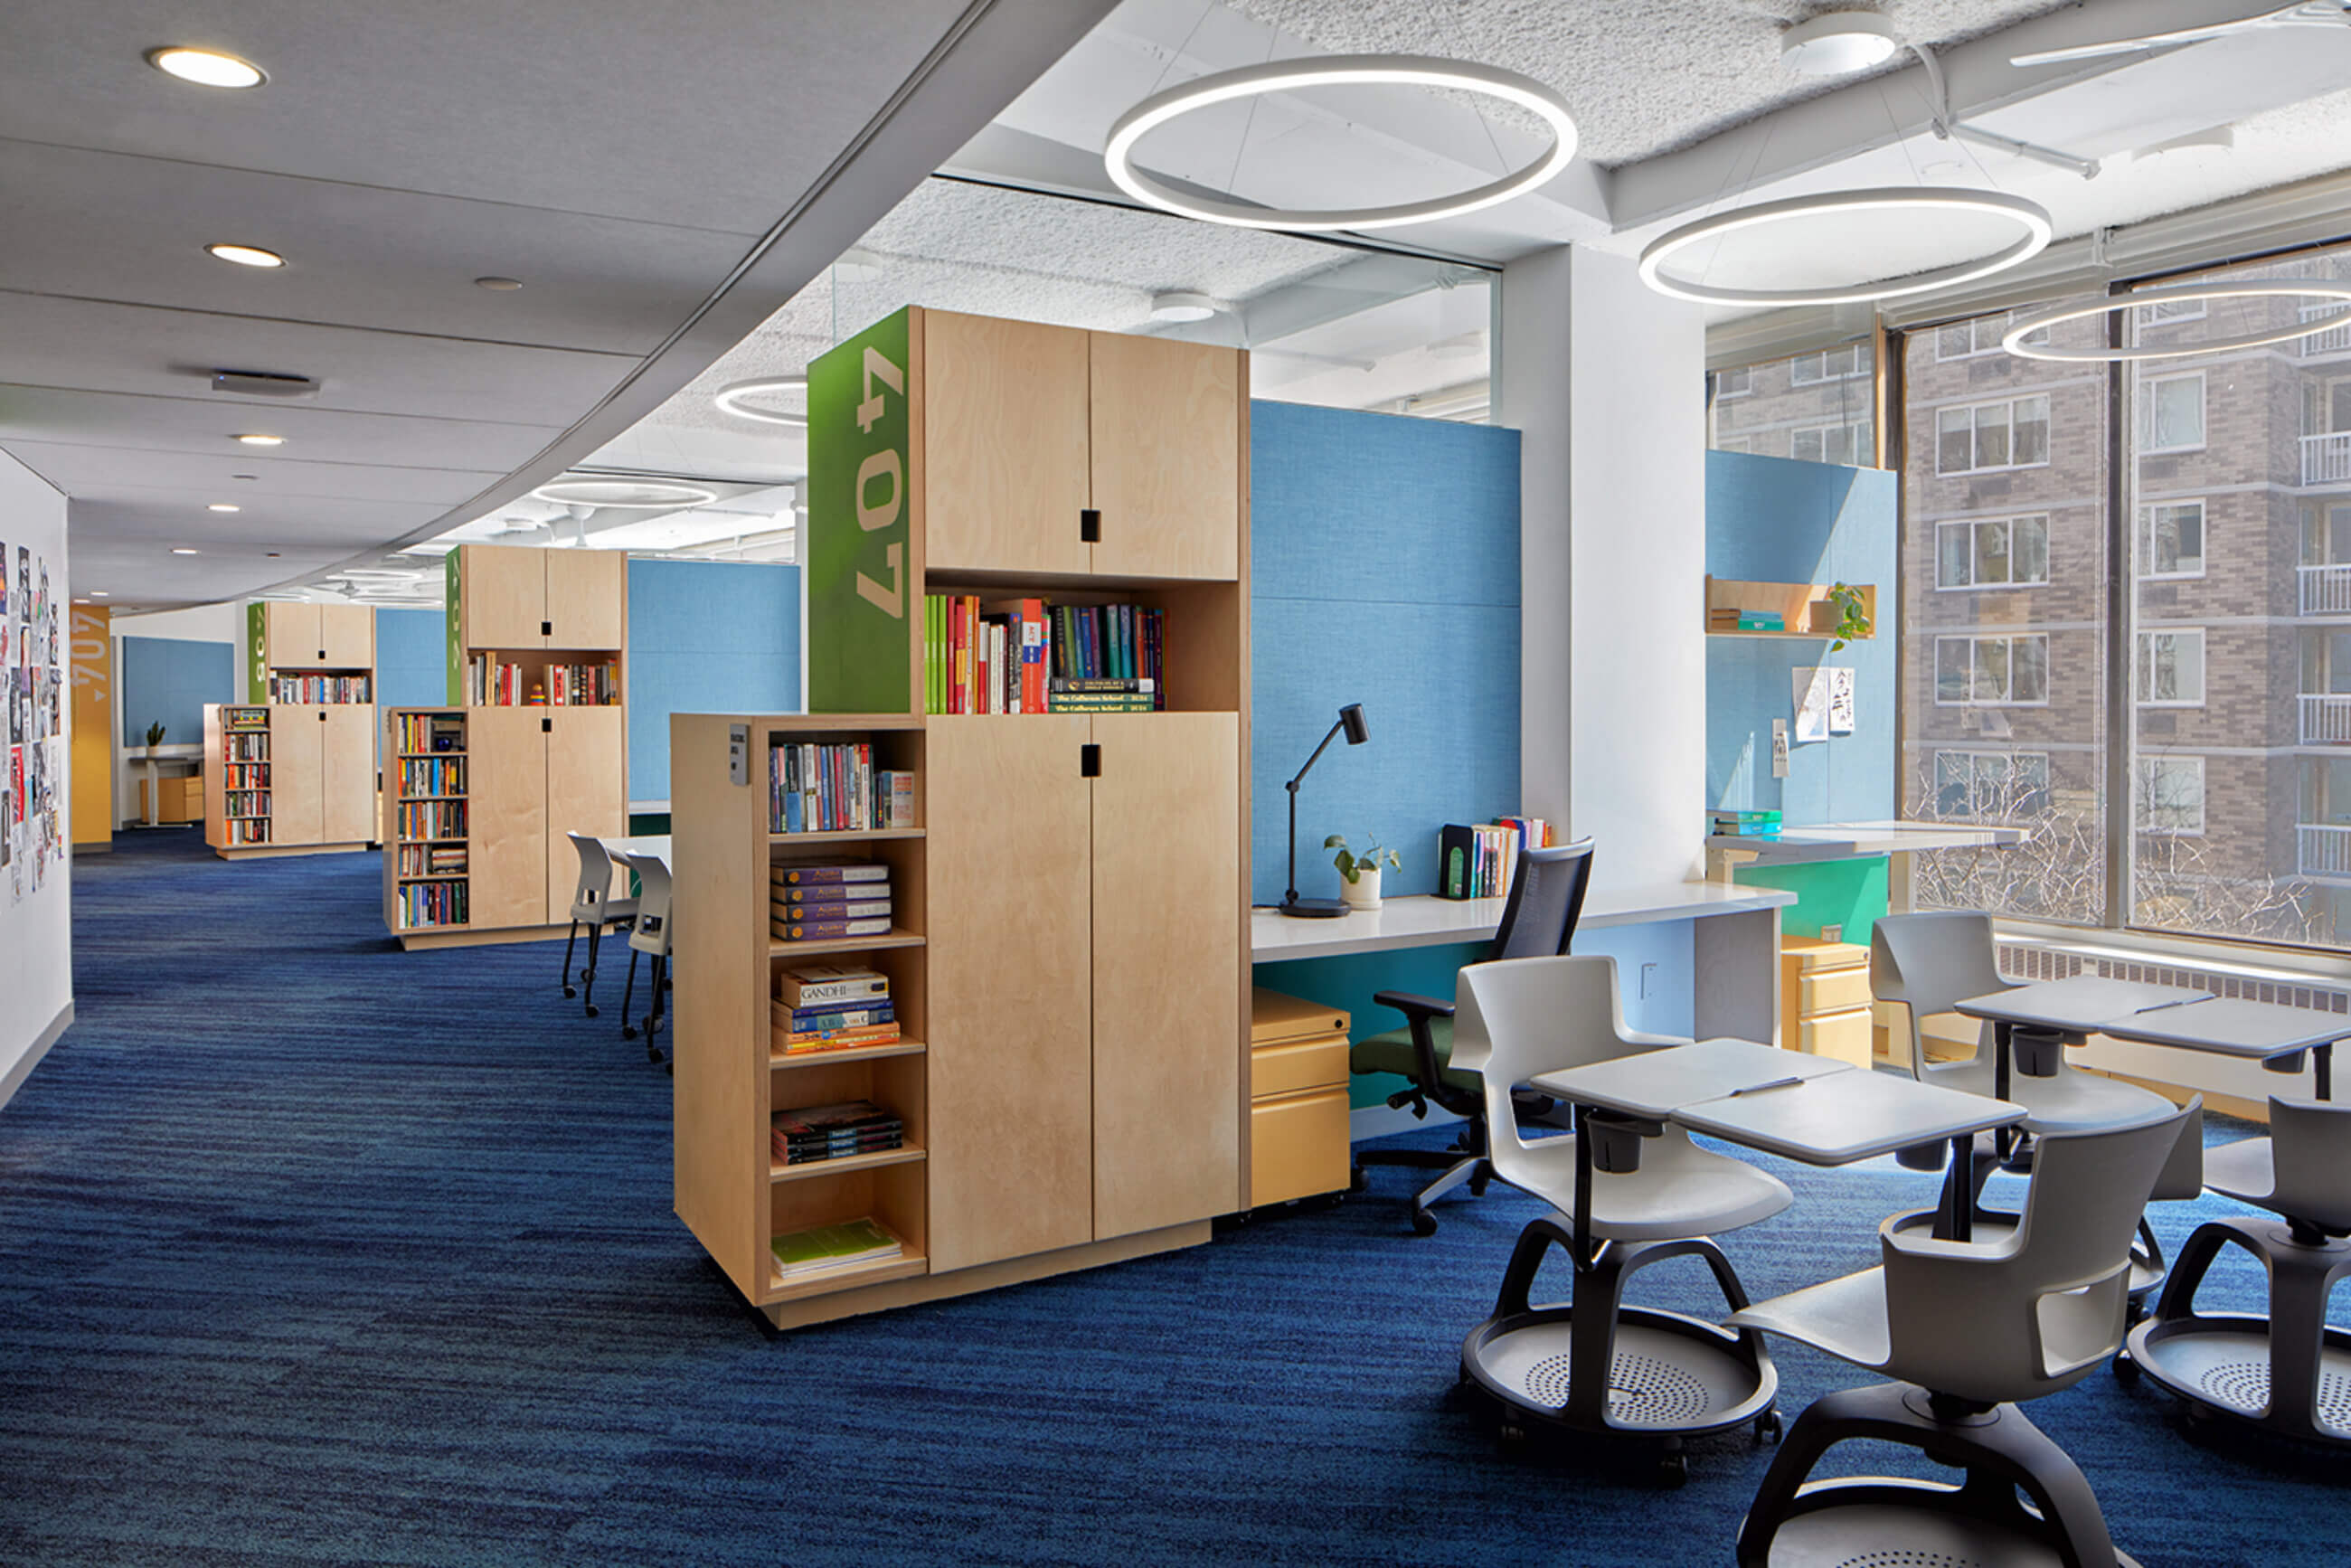 Lighting Design of a Academic Space